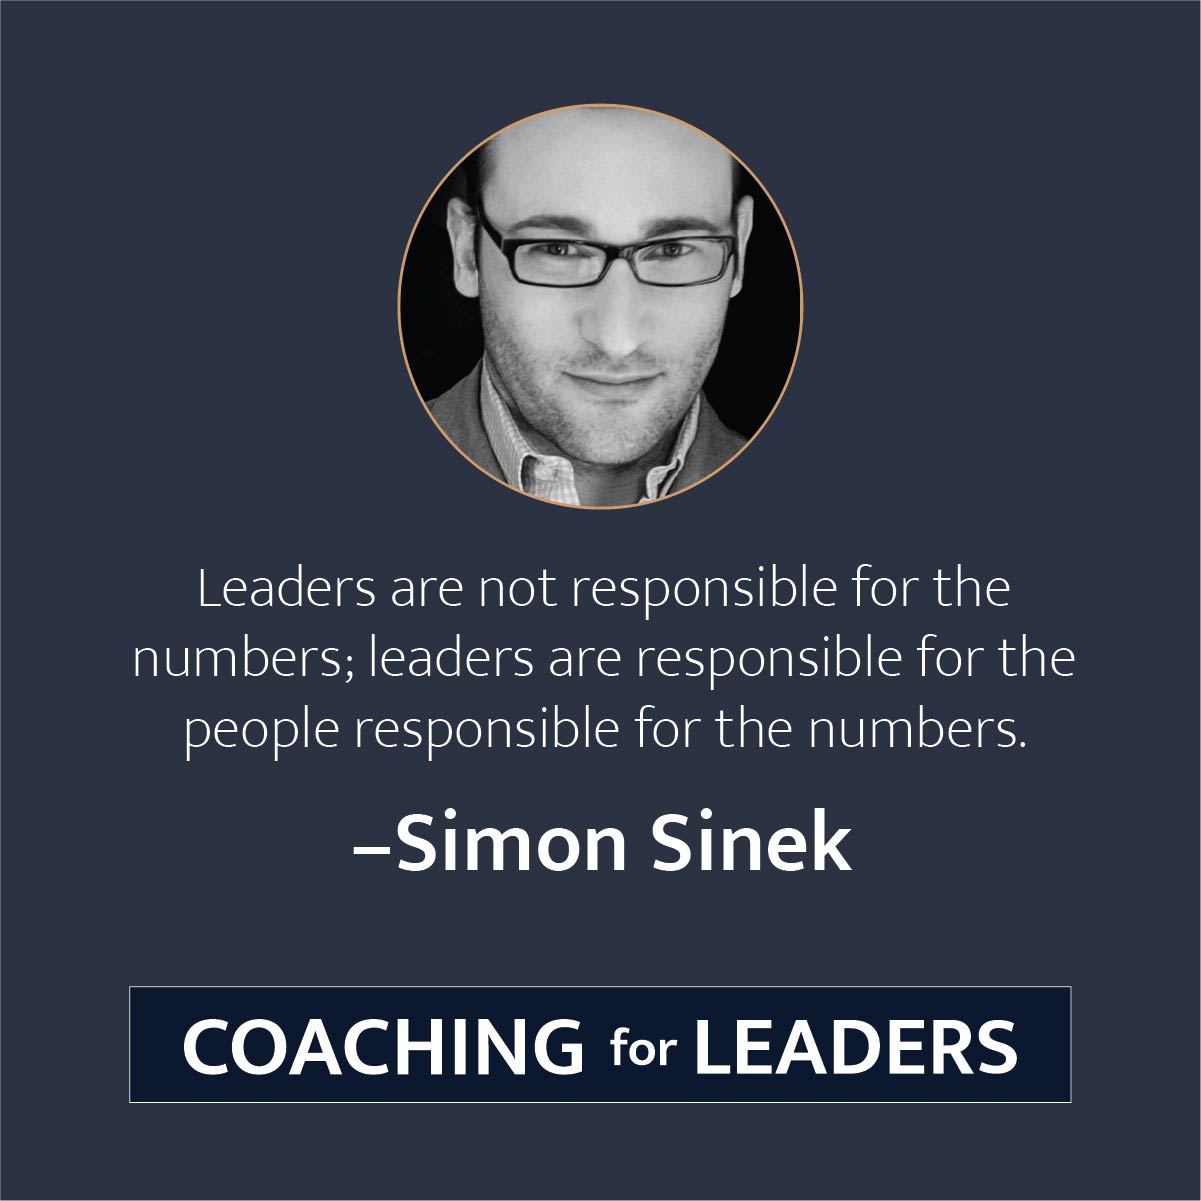 223 Start With Why With Simon Sinek Coaching For Leaders